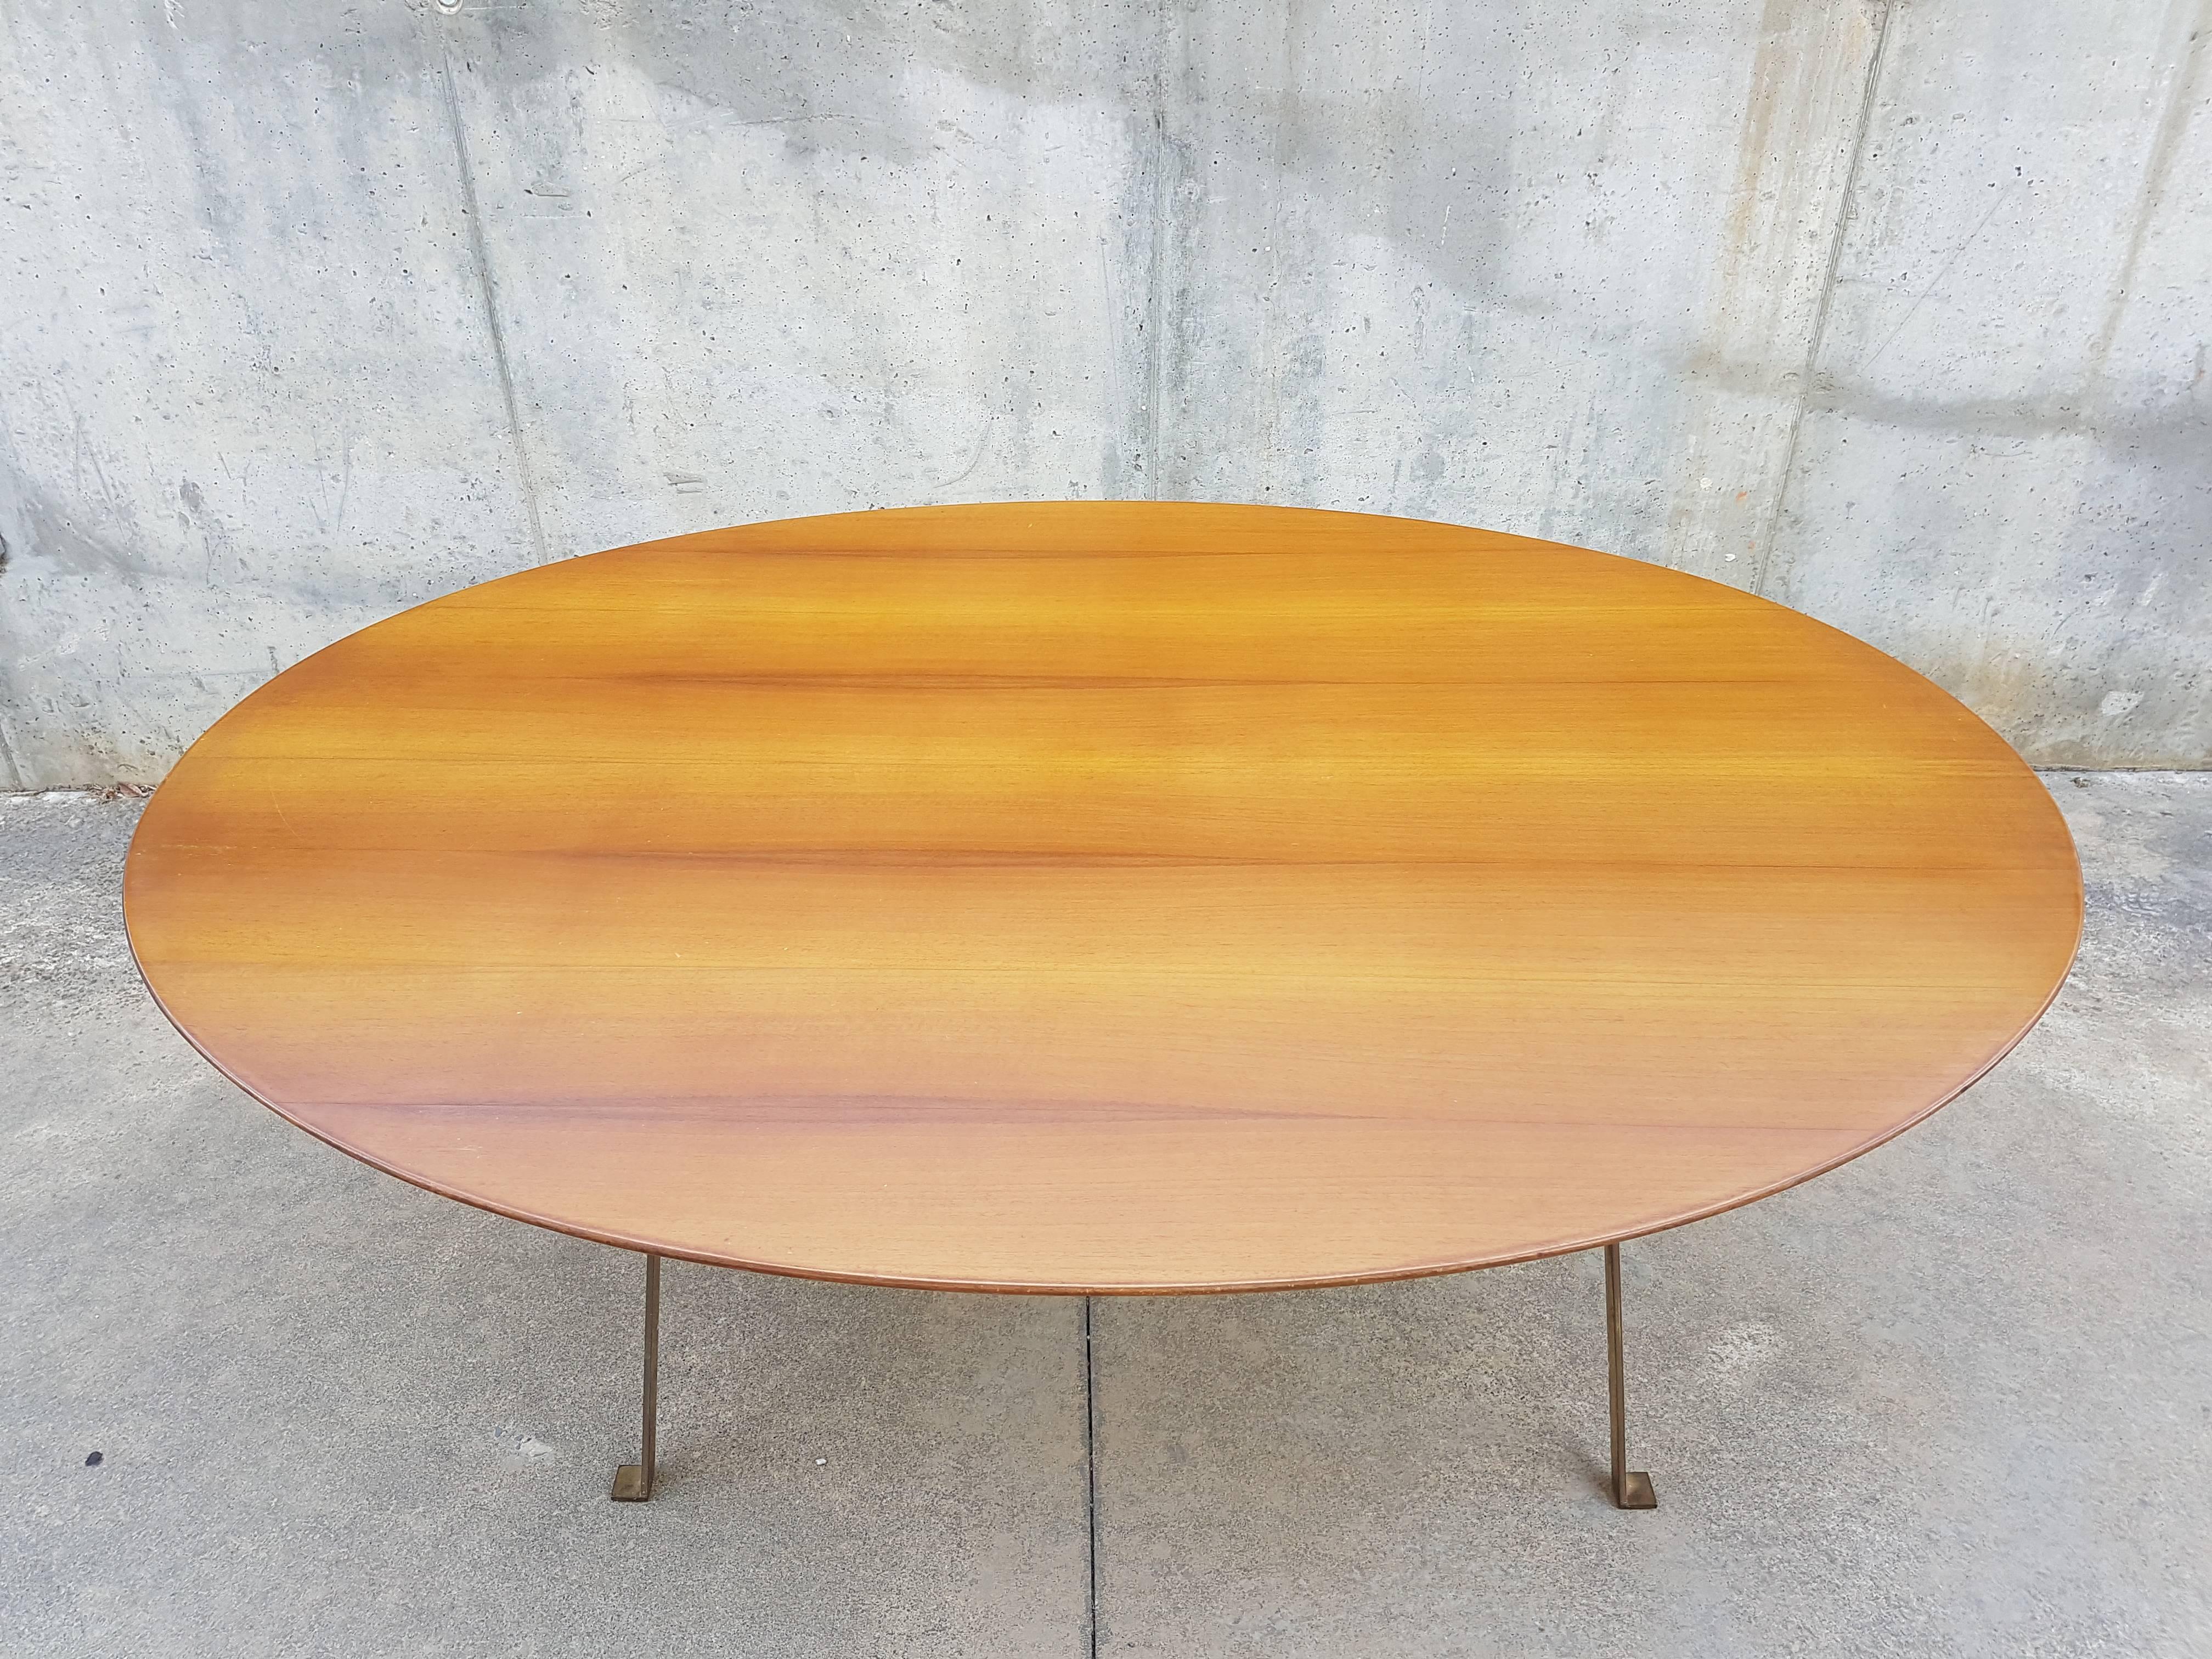 Italian Vintage Wood and Brass T3 Cavalletto Table by Caccia Dominioni for Azucena 1950s For Sale